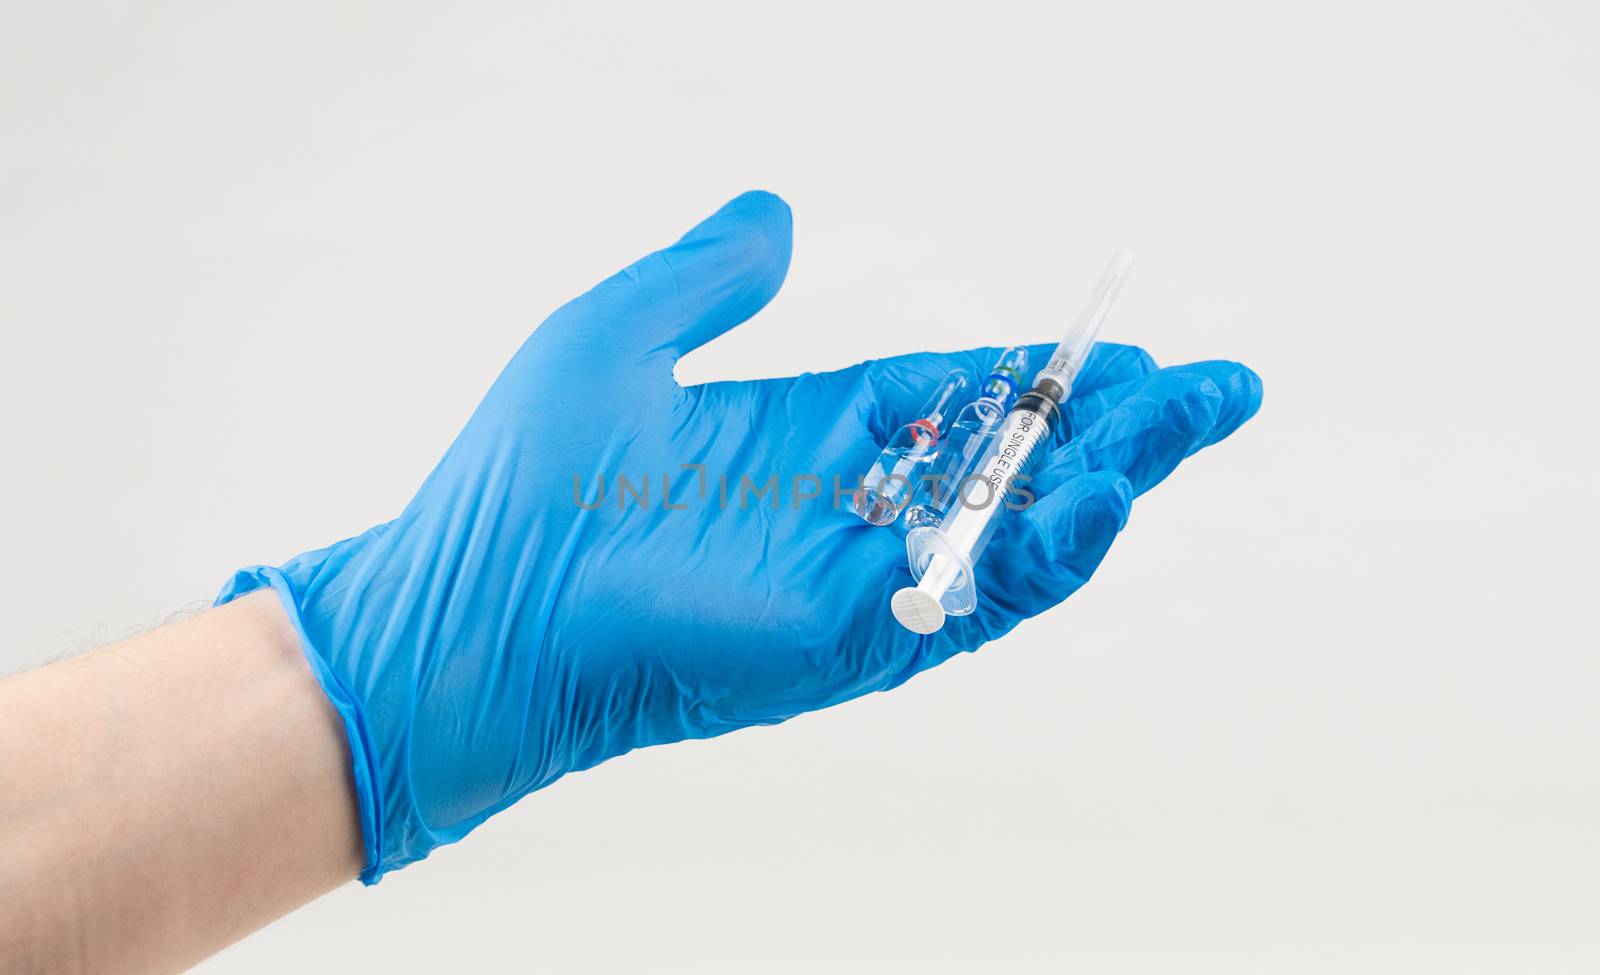 Hand in glove holds a syringe and a vaccine on a white background. Coronavirus Protection Concept